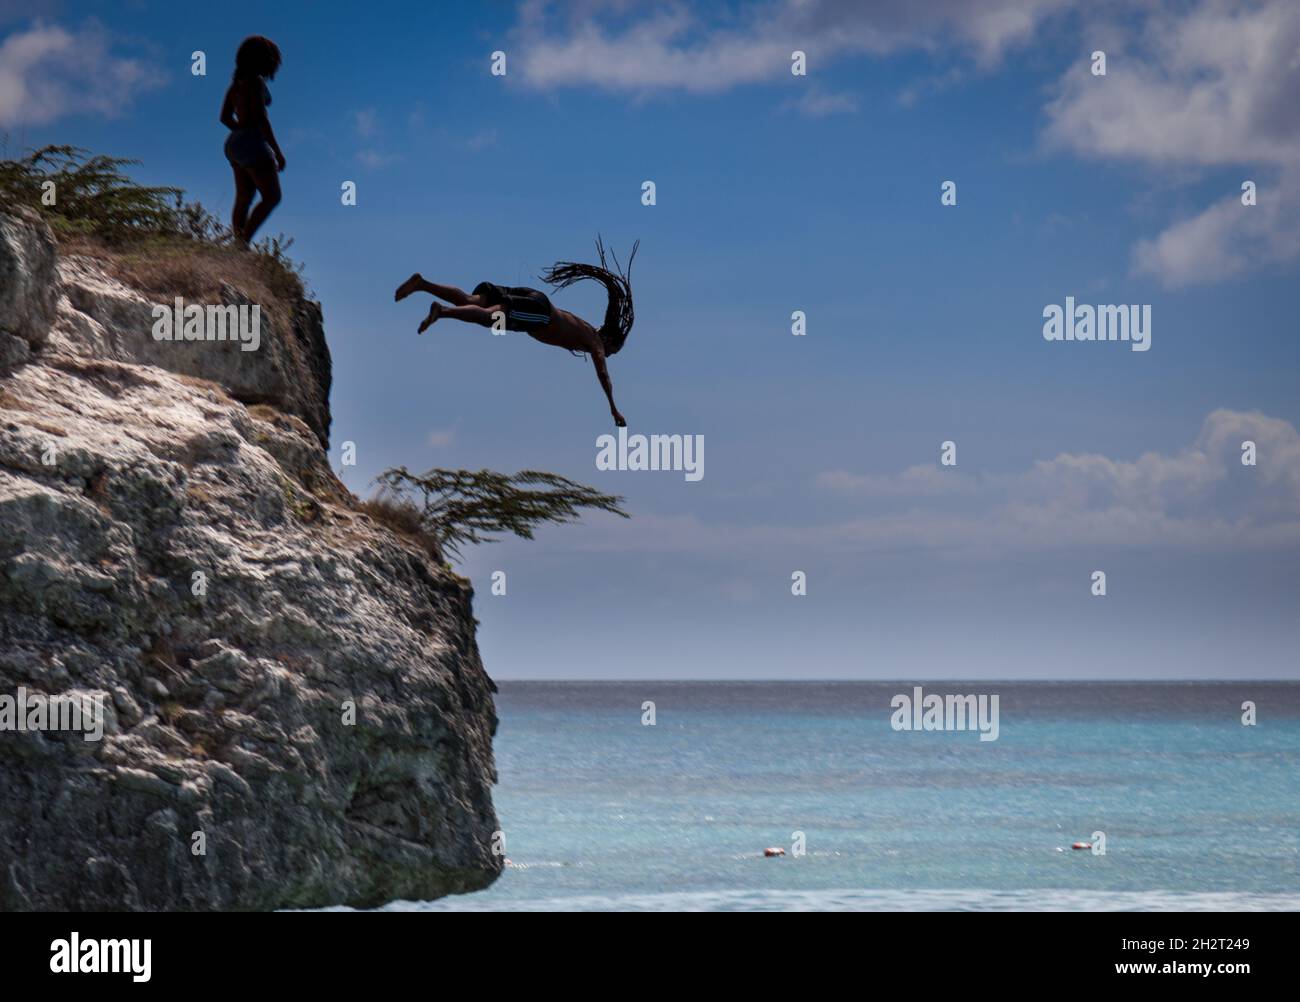 Young man diving off cliff. Stock Photo